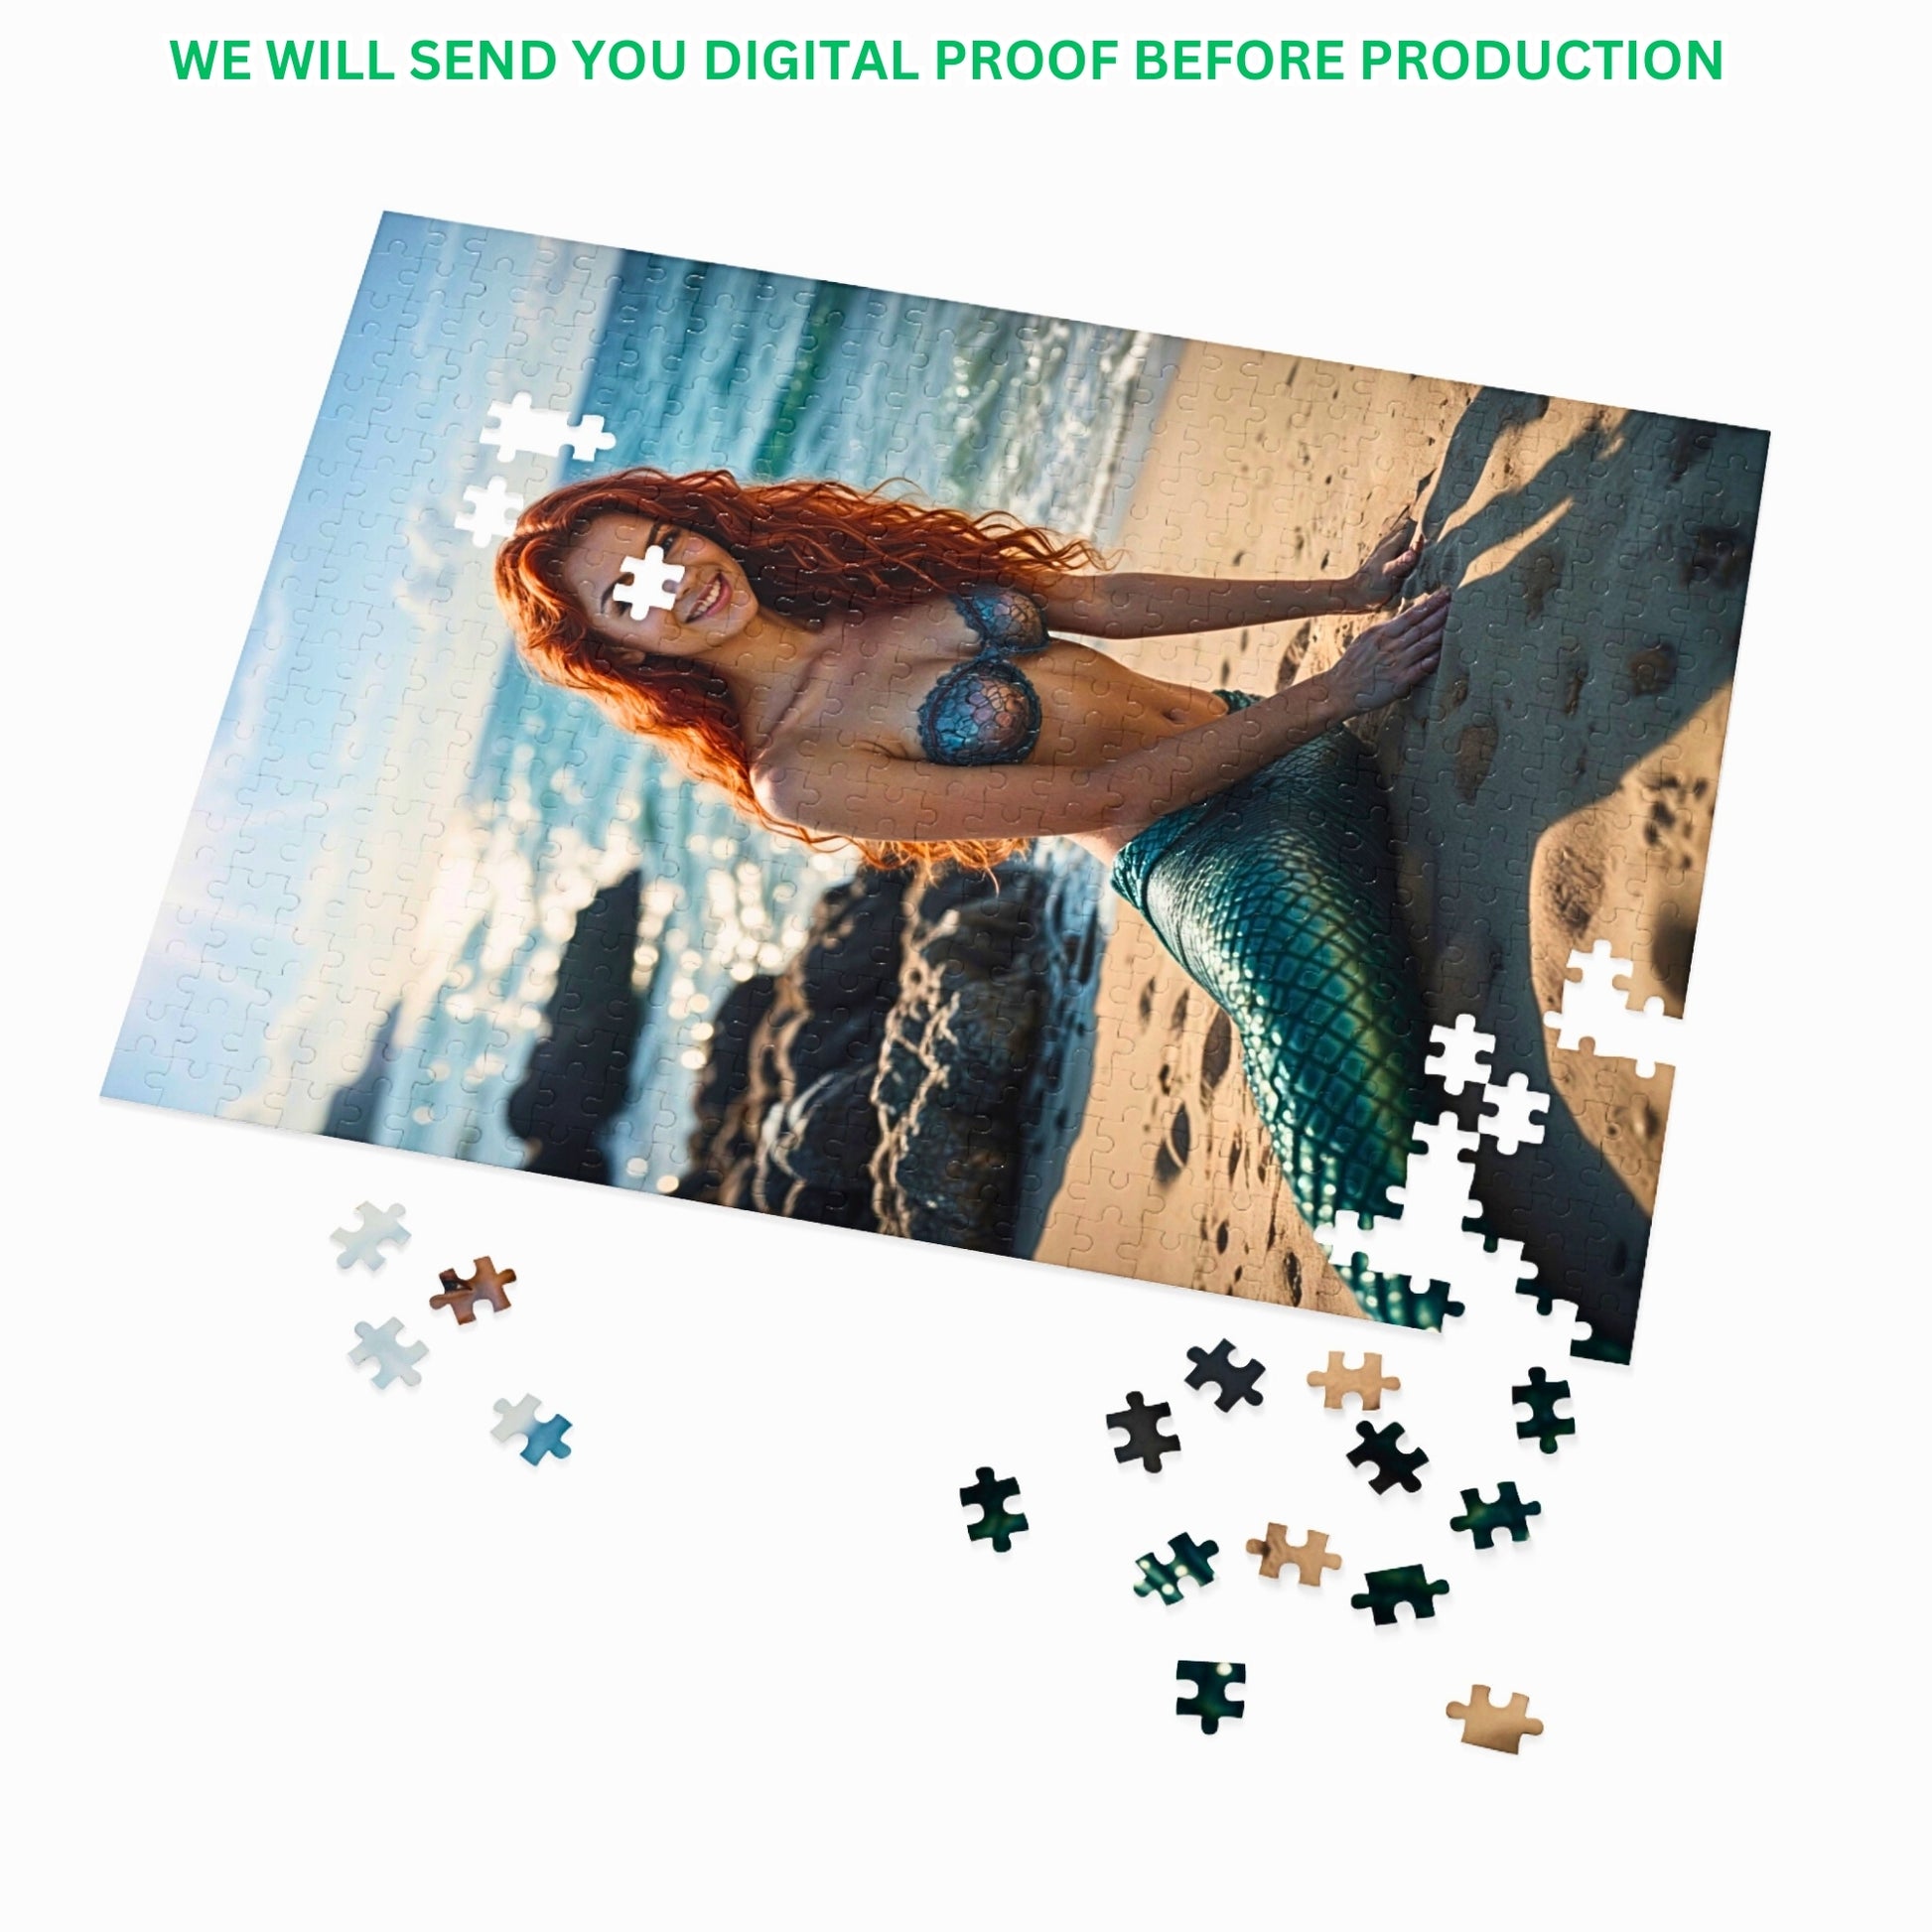 Transform your memories into a personalized mermaid puzzle! Customize a princess portrait for a special birthday surprise. Available in 250 to 1000 pieces. Lady mermaid gifts, princess gifts, and mermaid photo gifts are options. Convert any image into a unique mermaid art puzzle. Perfect for mermaid and princess enthusiasts. Order your bespoke puzzle creation today!